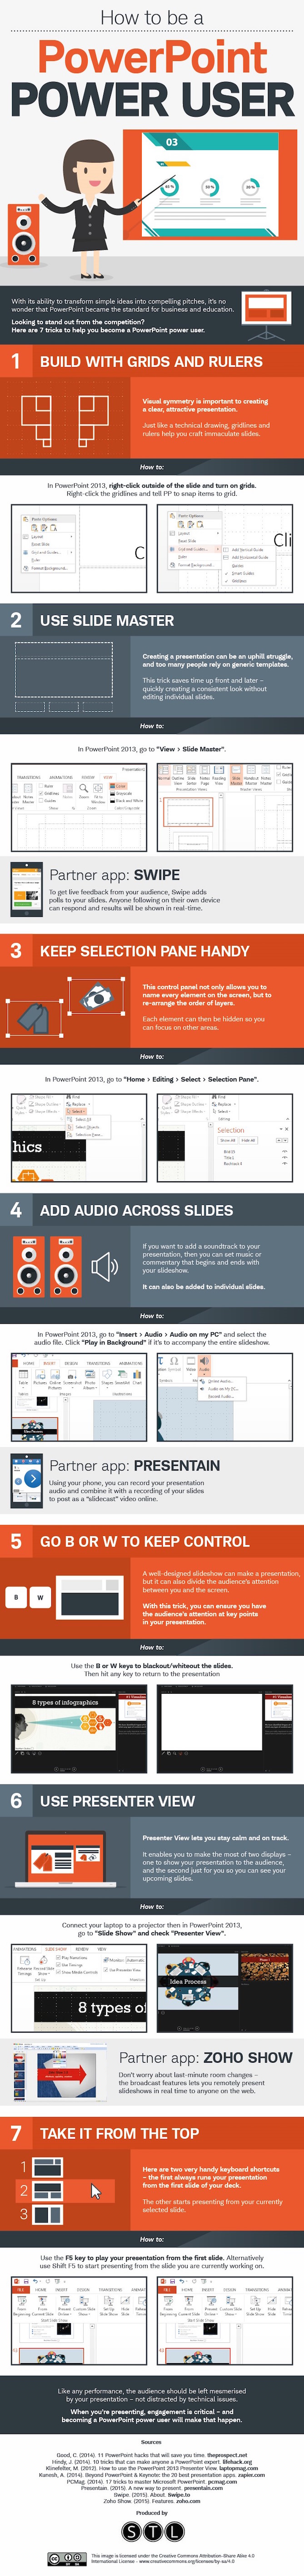 7 Little-Known Tricks for Creating More Powerful Pitch Decks With PowerPoint [Infographic]